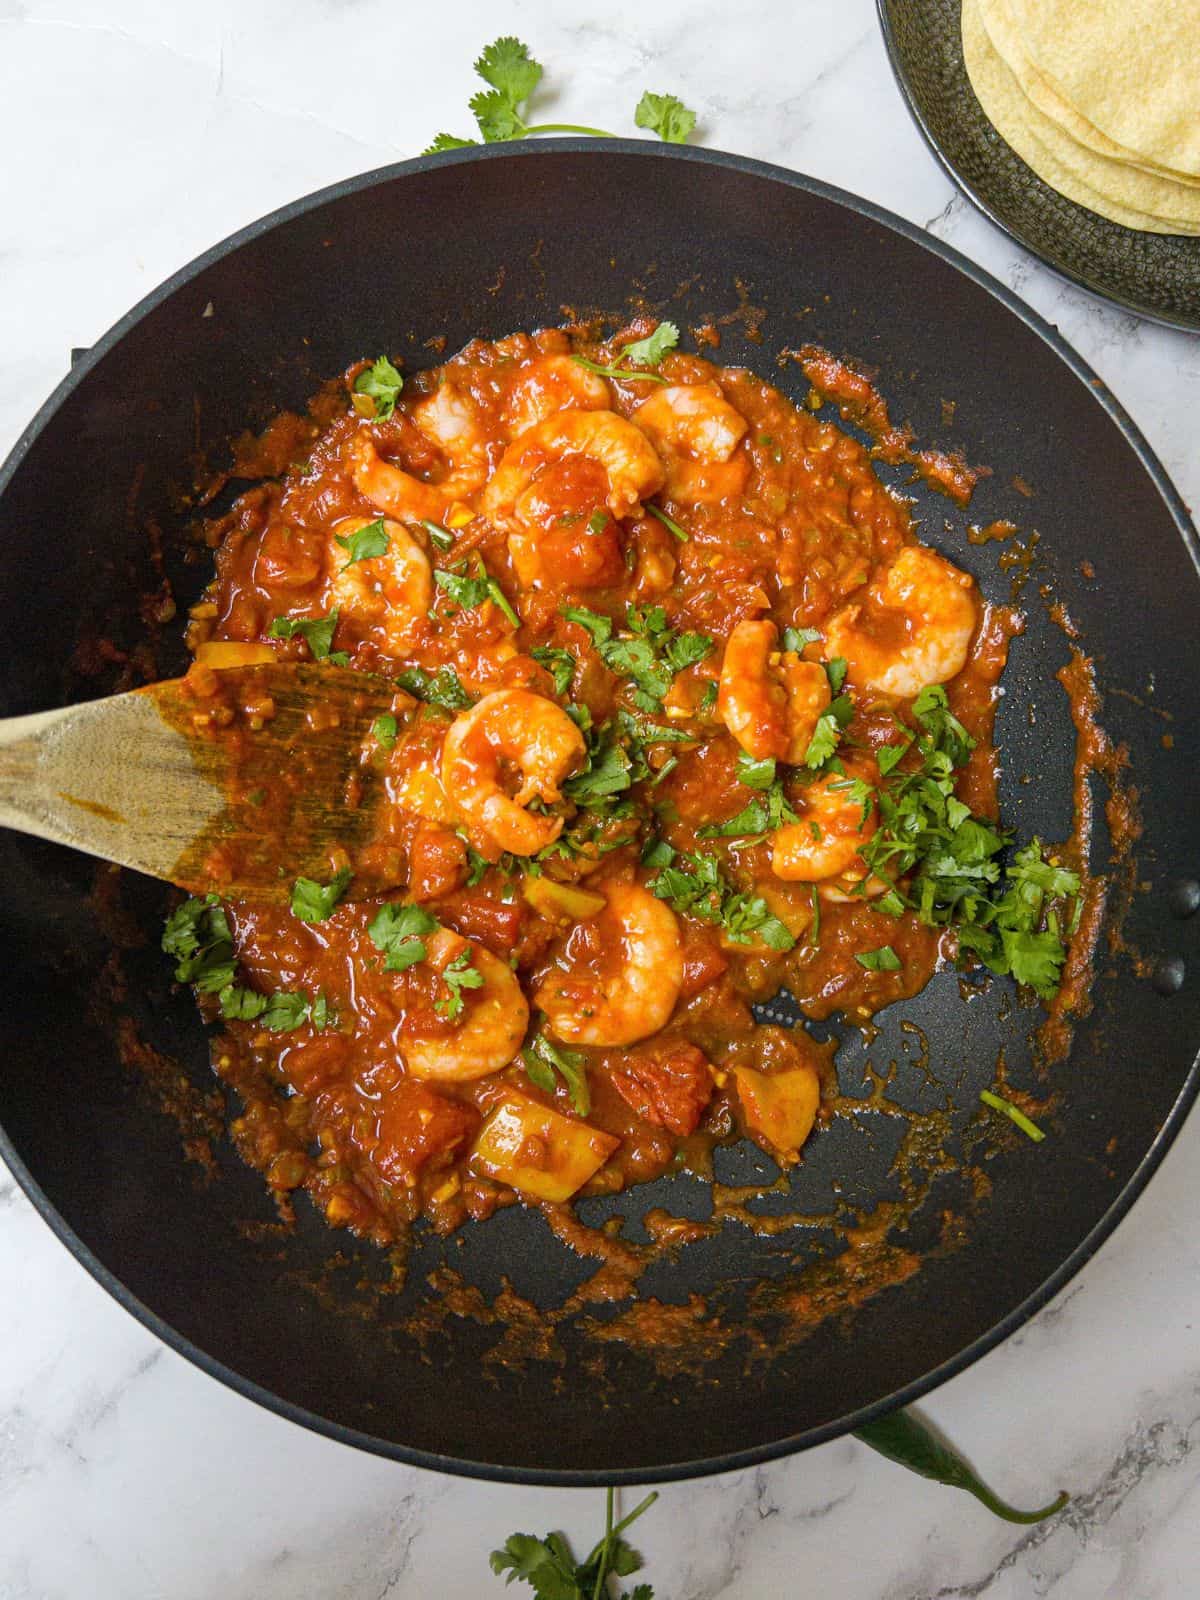 Prawn balti garnished with coriander in a black frying pan being stirred with a wooden spoon.